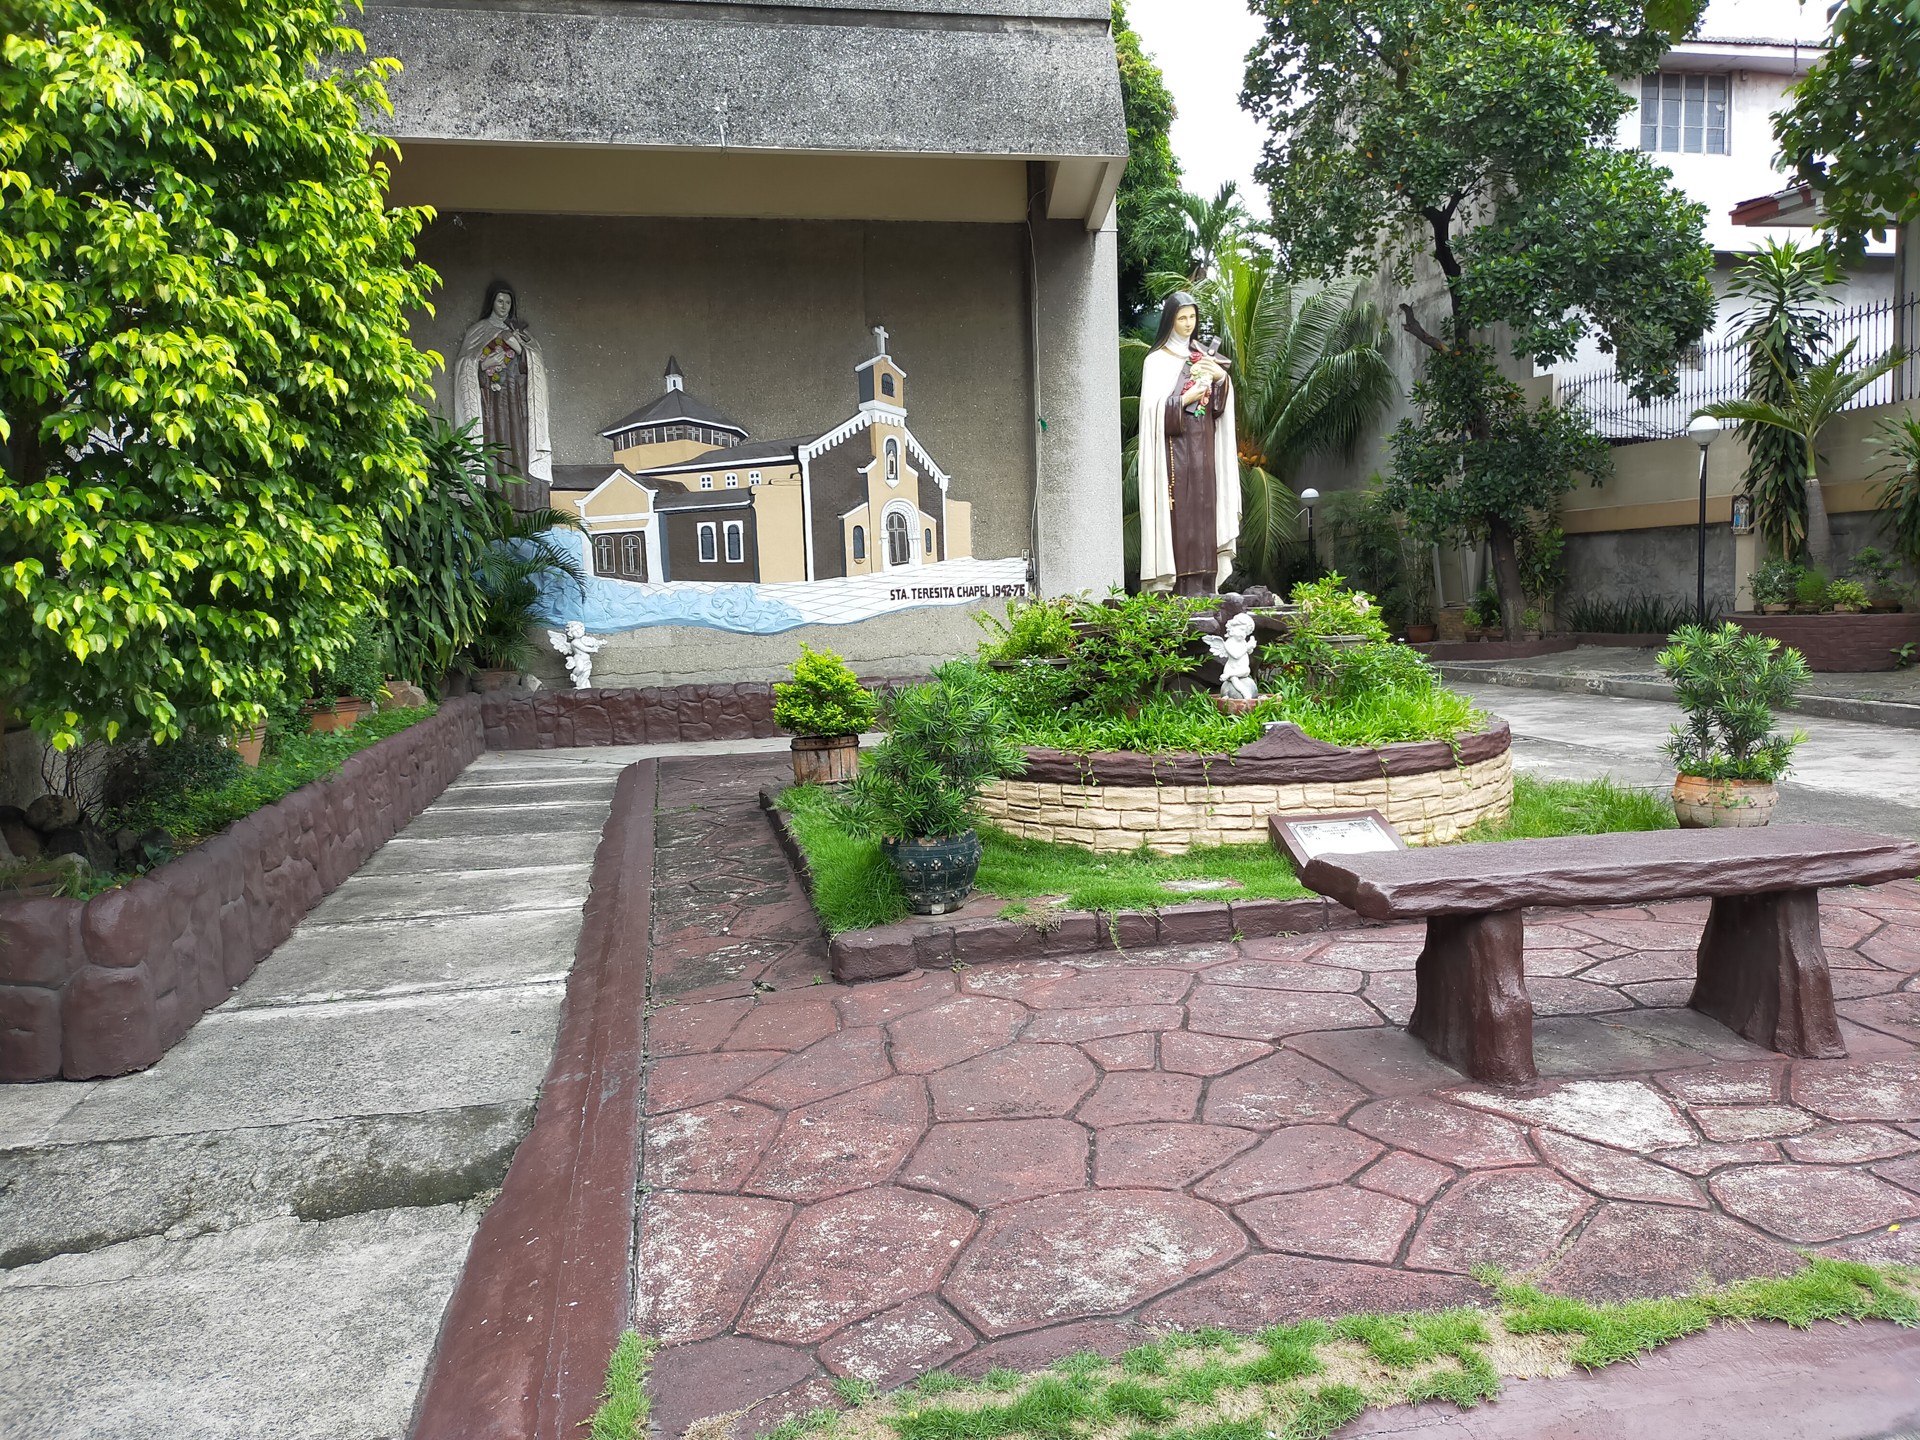 Photo of a garden at a church using regular camera of the Oppo A92